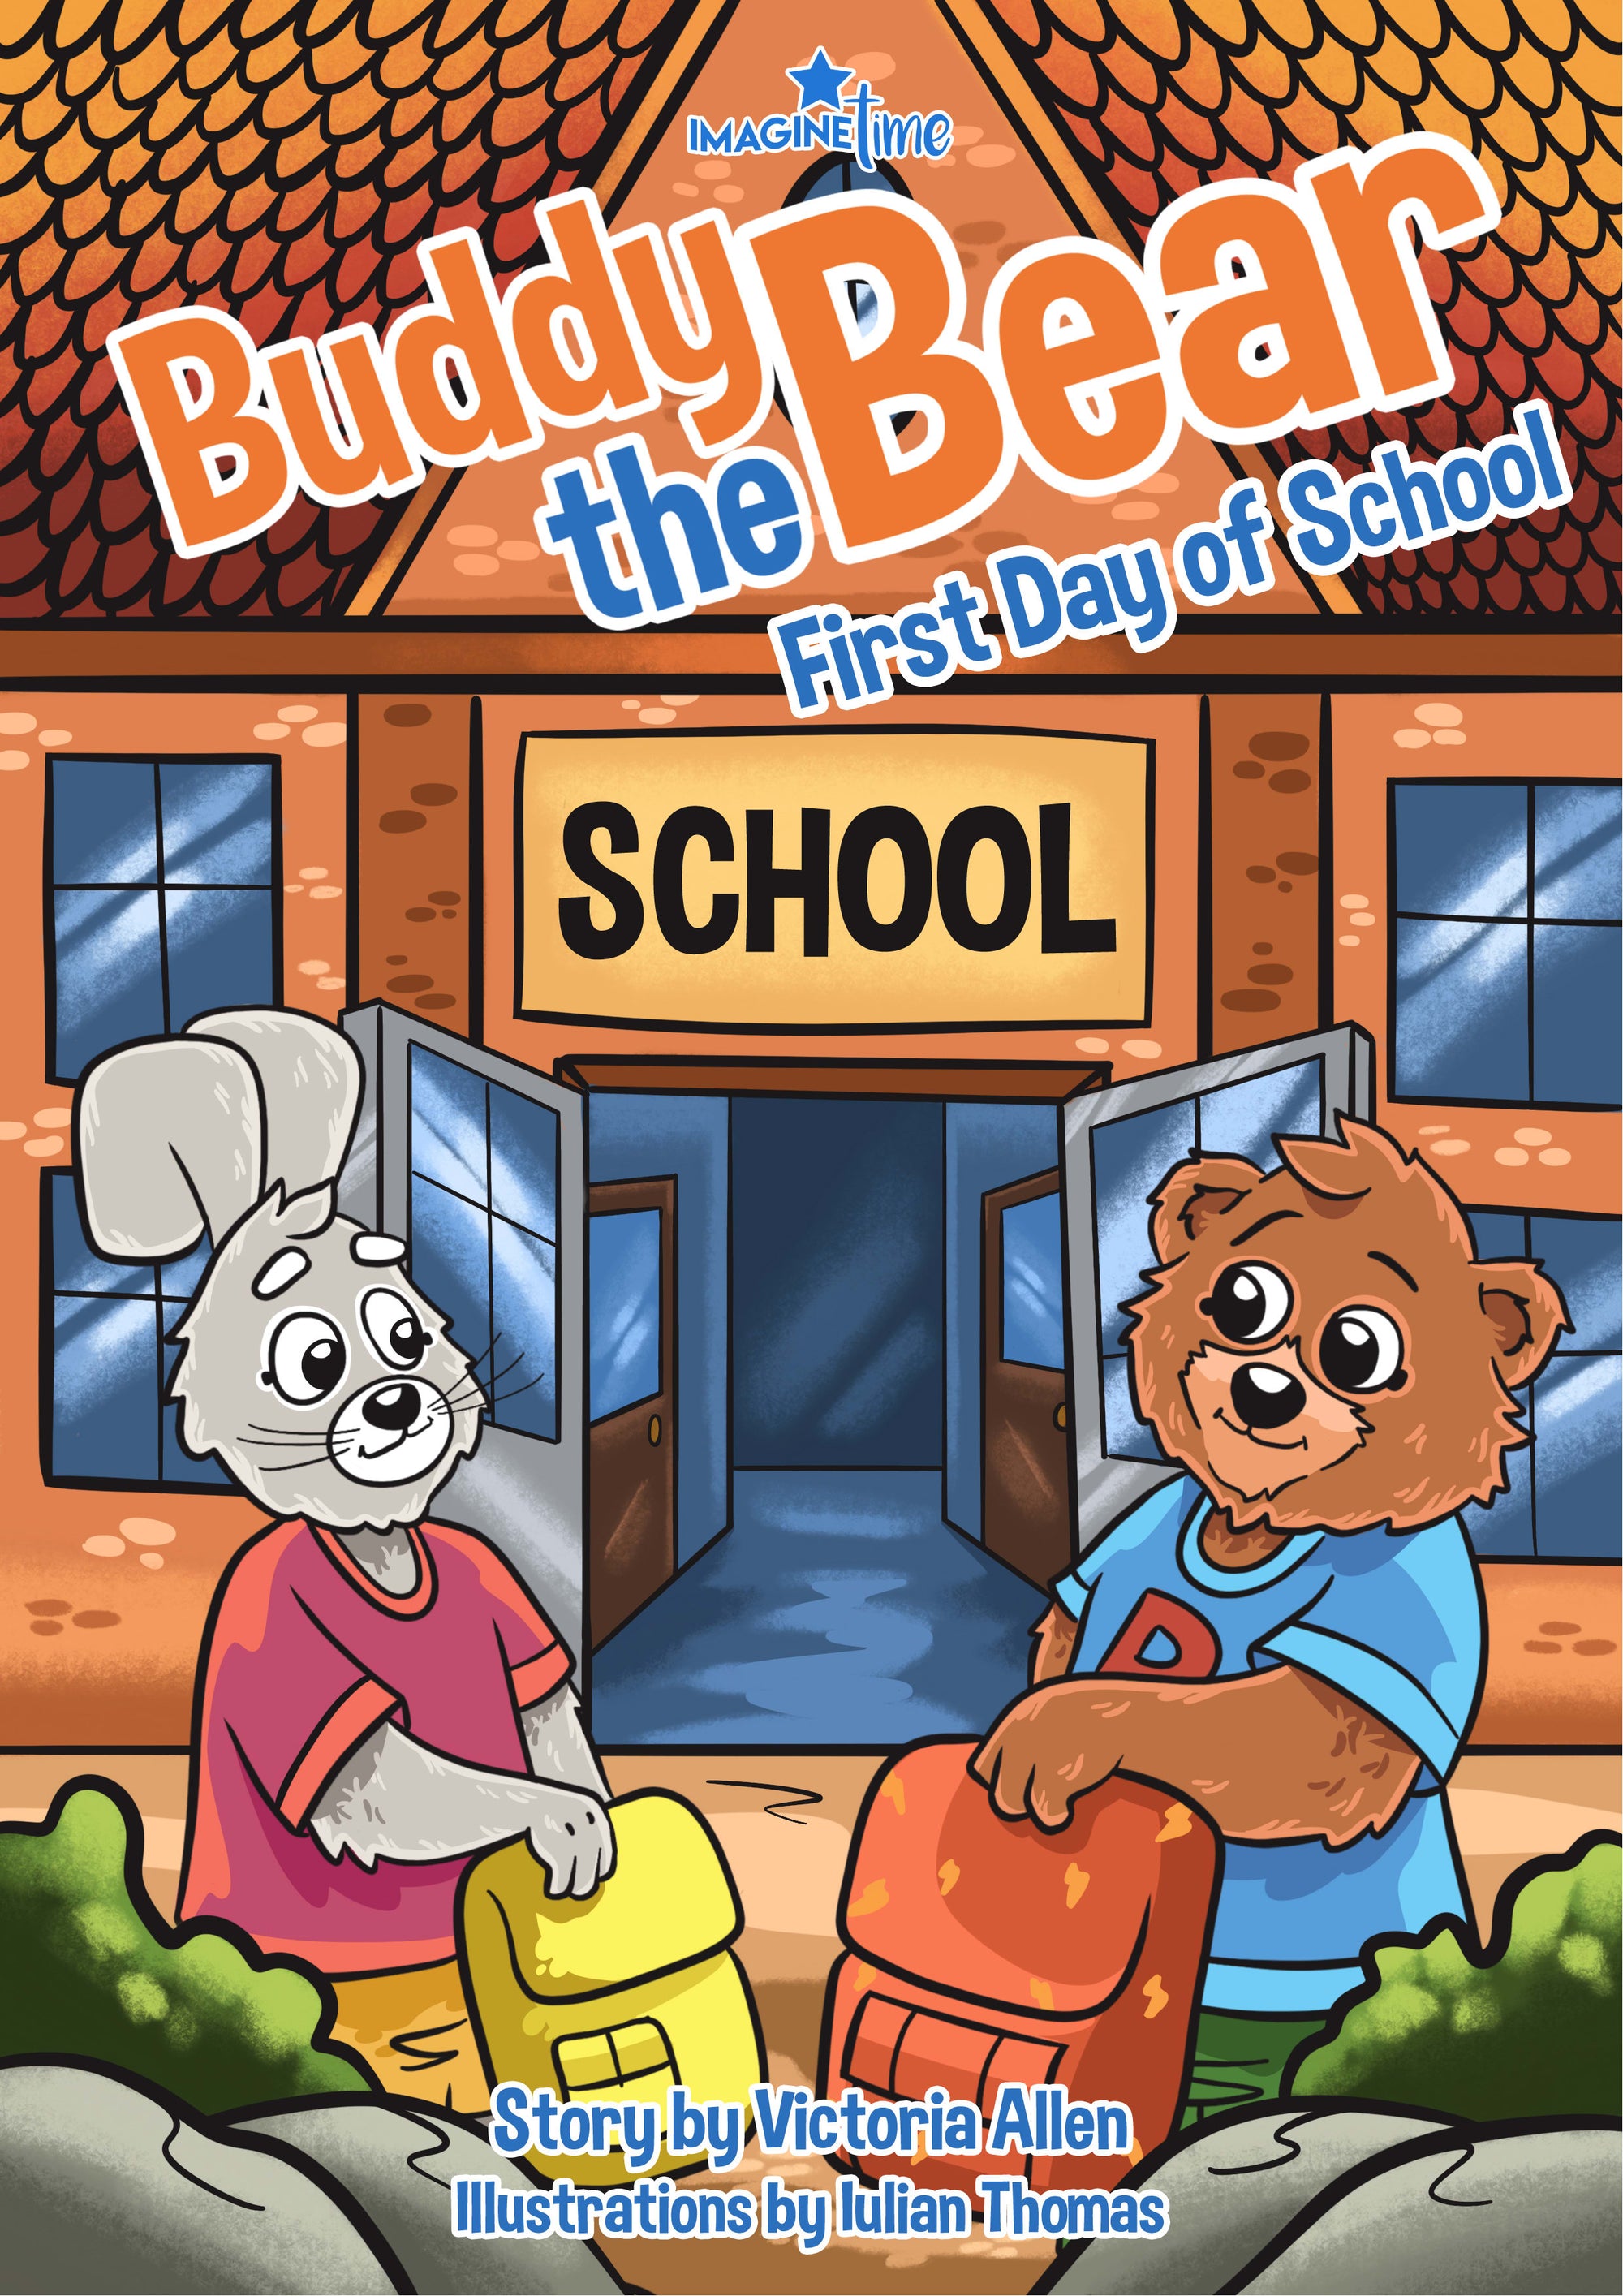 FIRST DAY OF SCHOOL BOOK